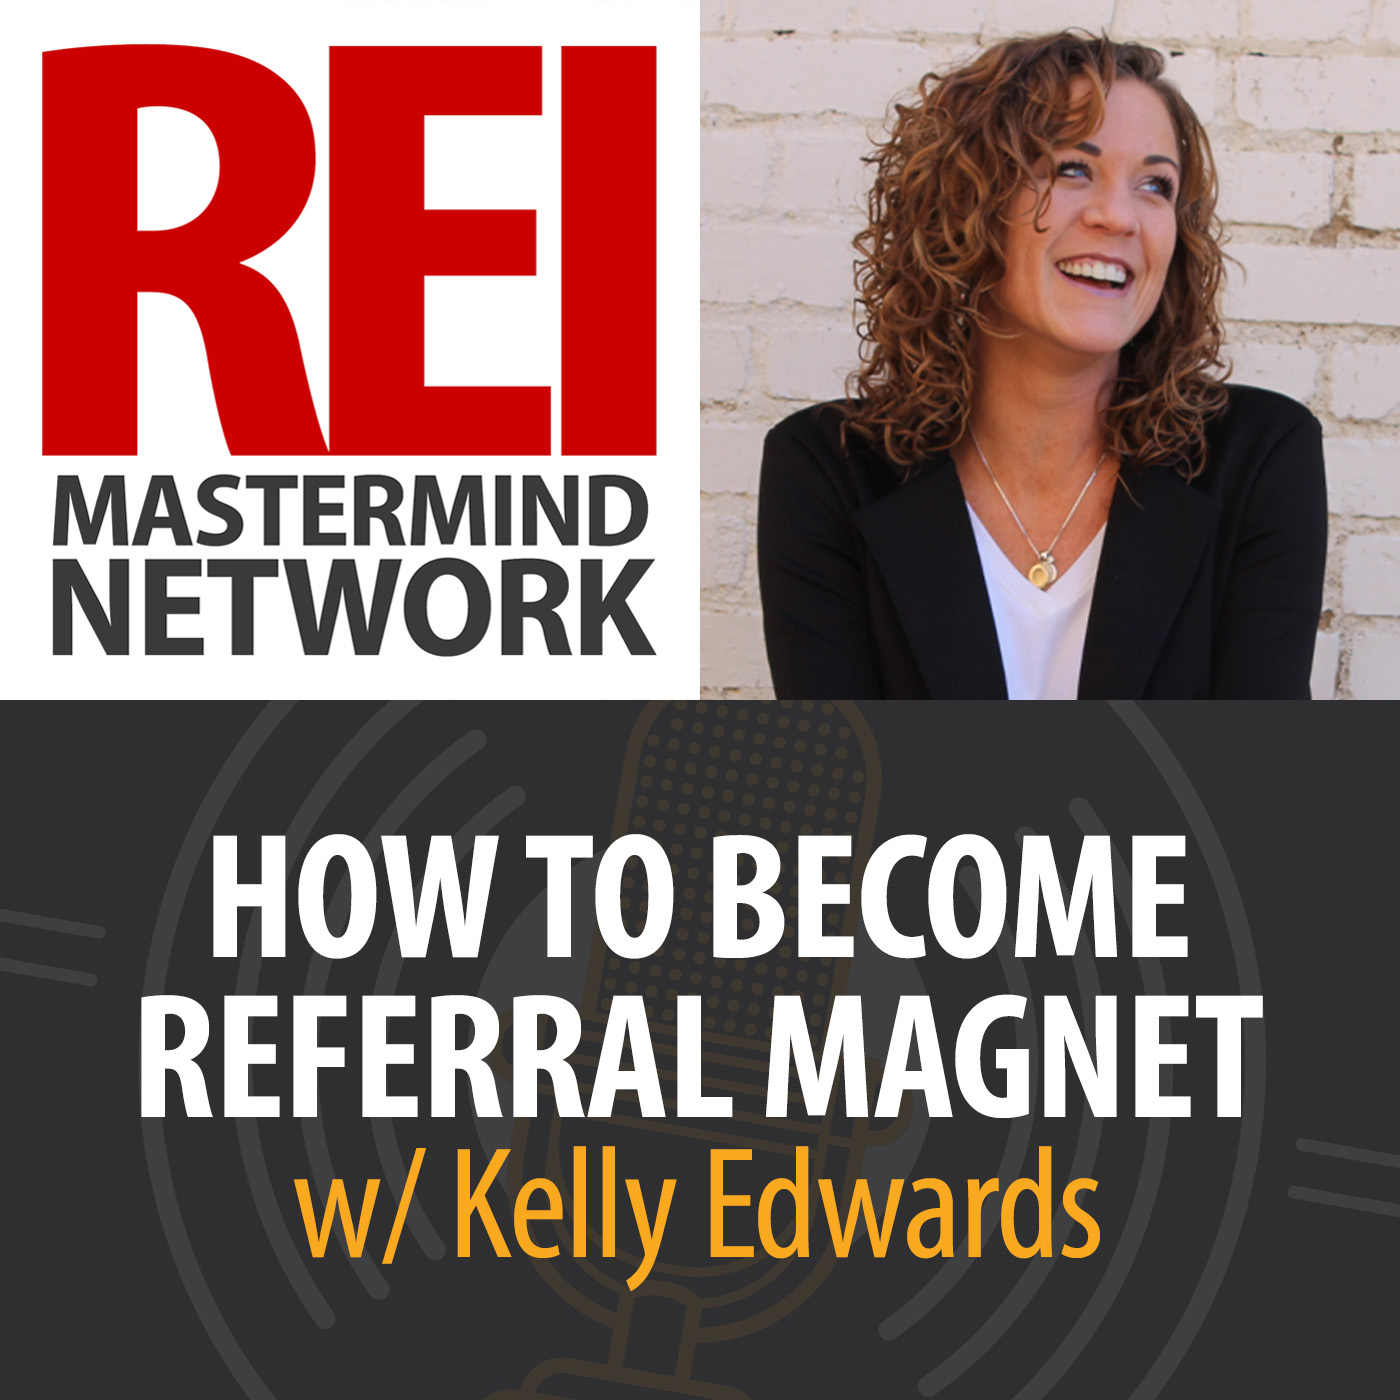 How to Become a Referral Magnet with Kelly Edwards